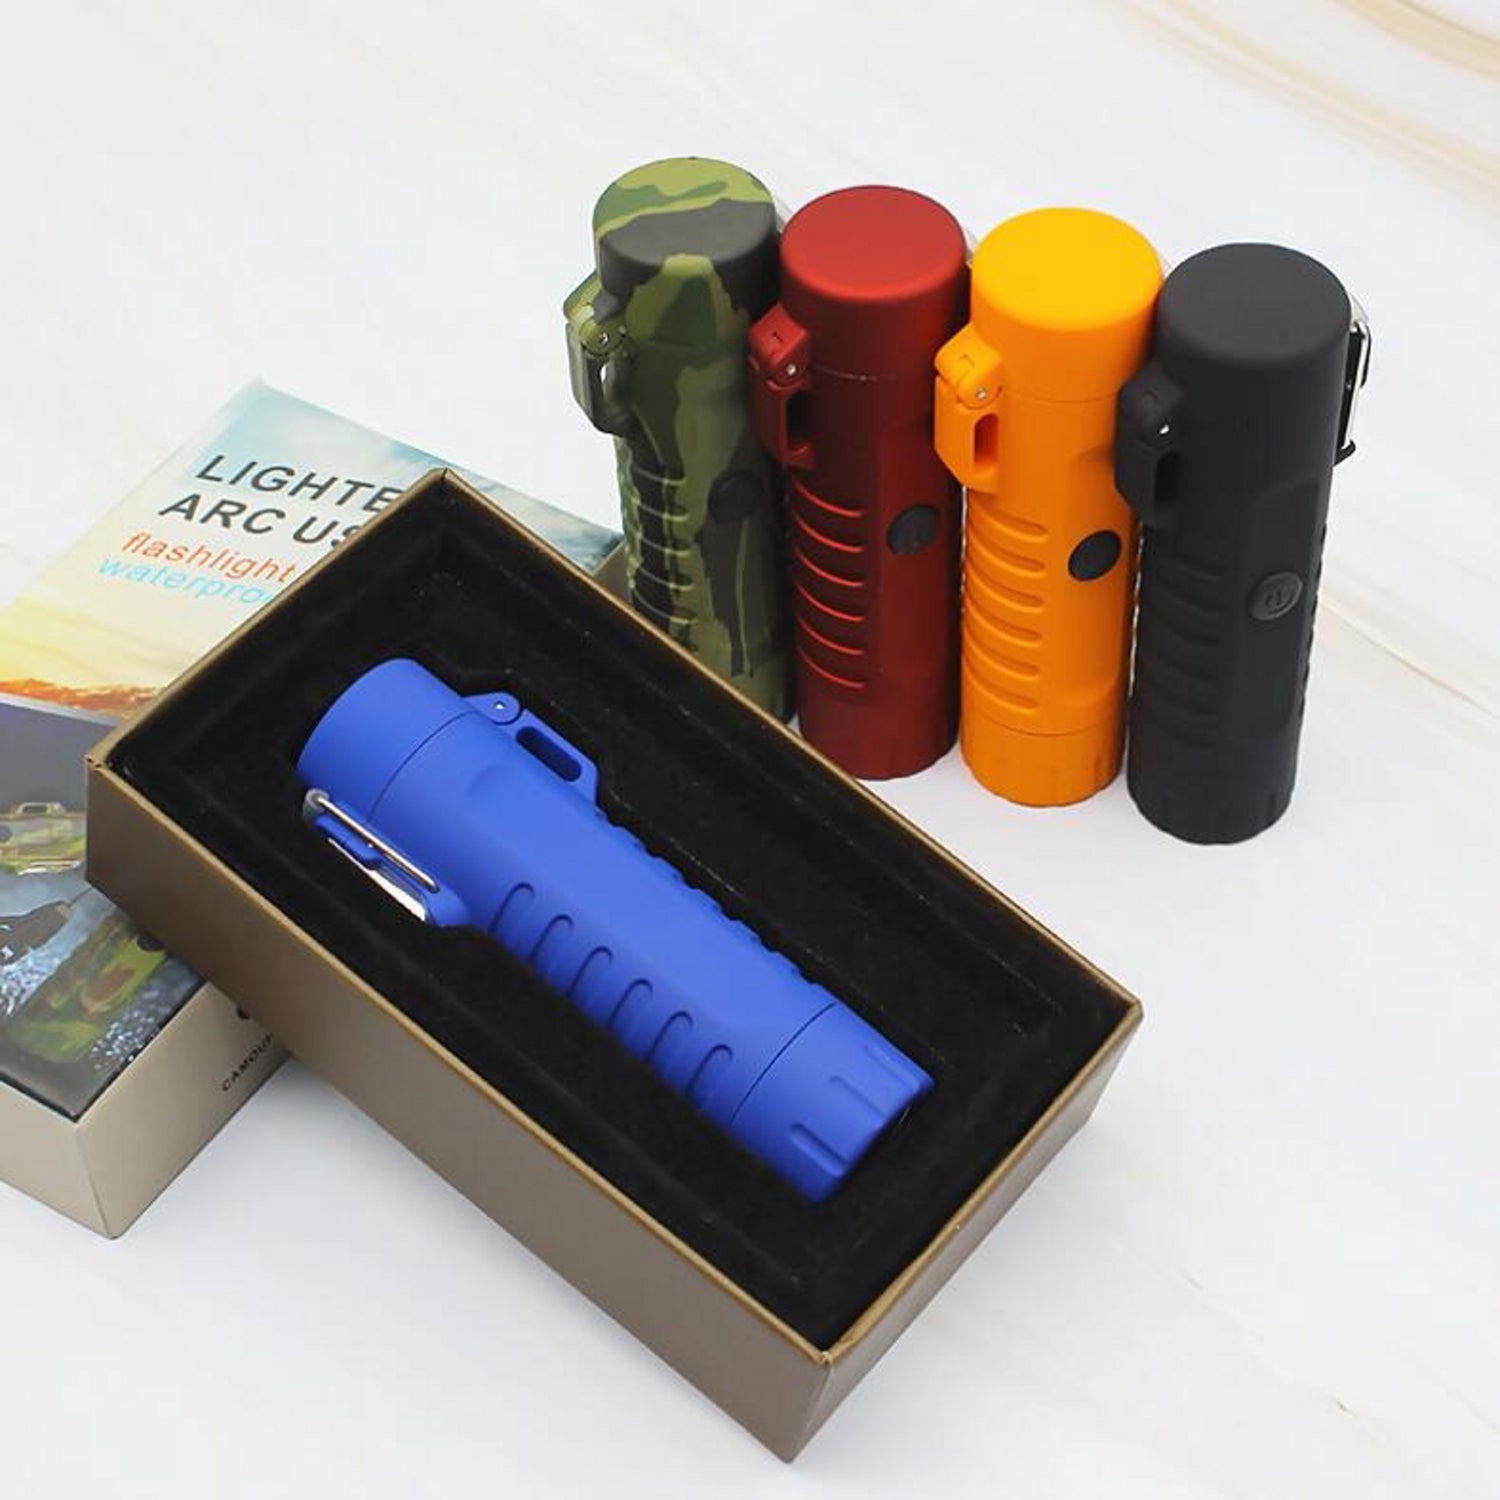 Blue Tactical Waterproof Dual Arc Lighter with LED Tri-Phase Flashlight